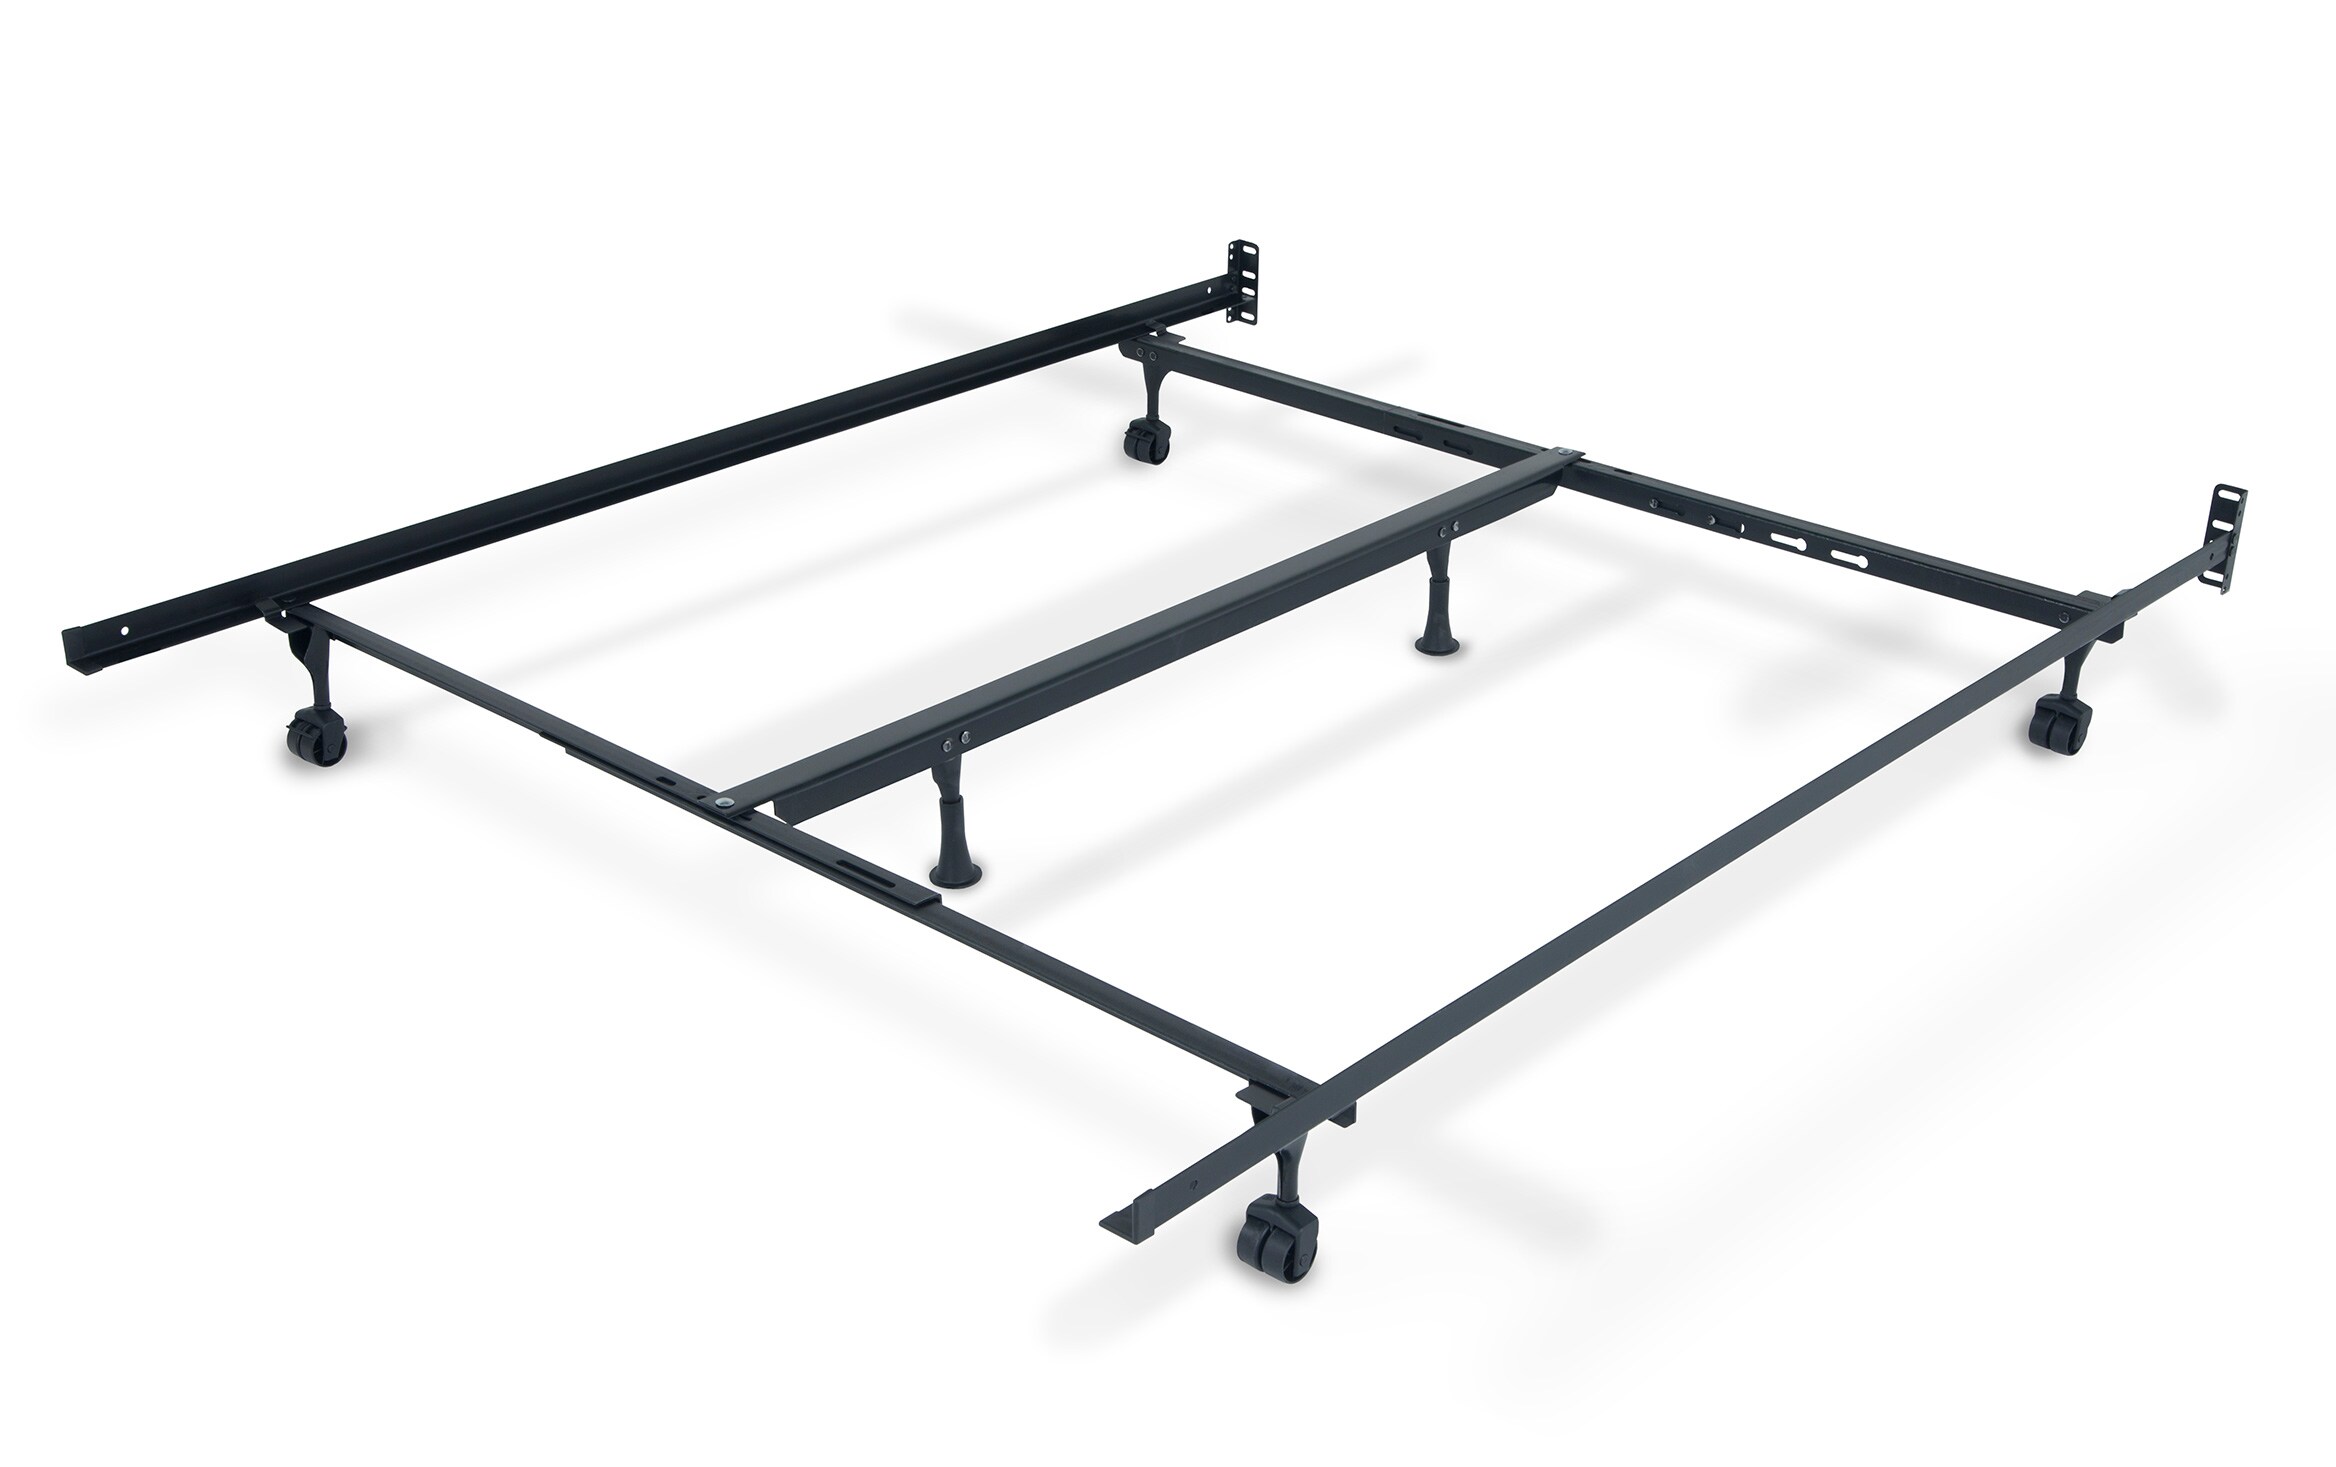 Queen King Bed Frame With Casters Bob, King Bed Foundation